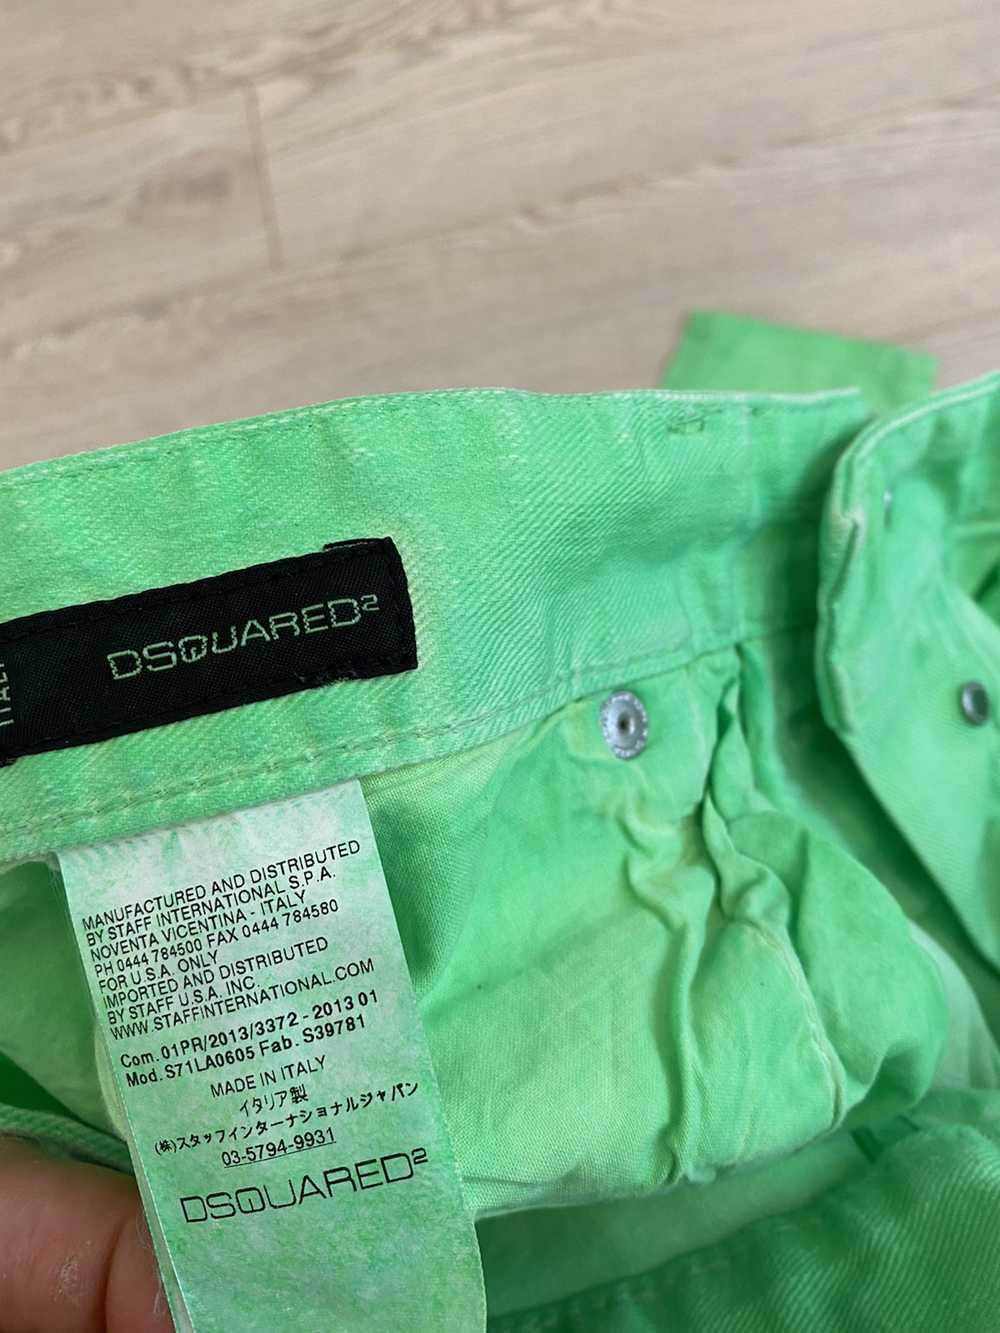 Dsquared2 Dsquared2 Light Green Painted Jeans - image 6